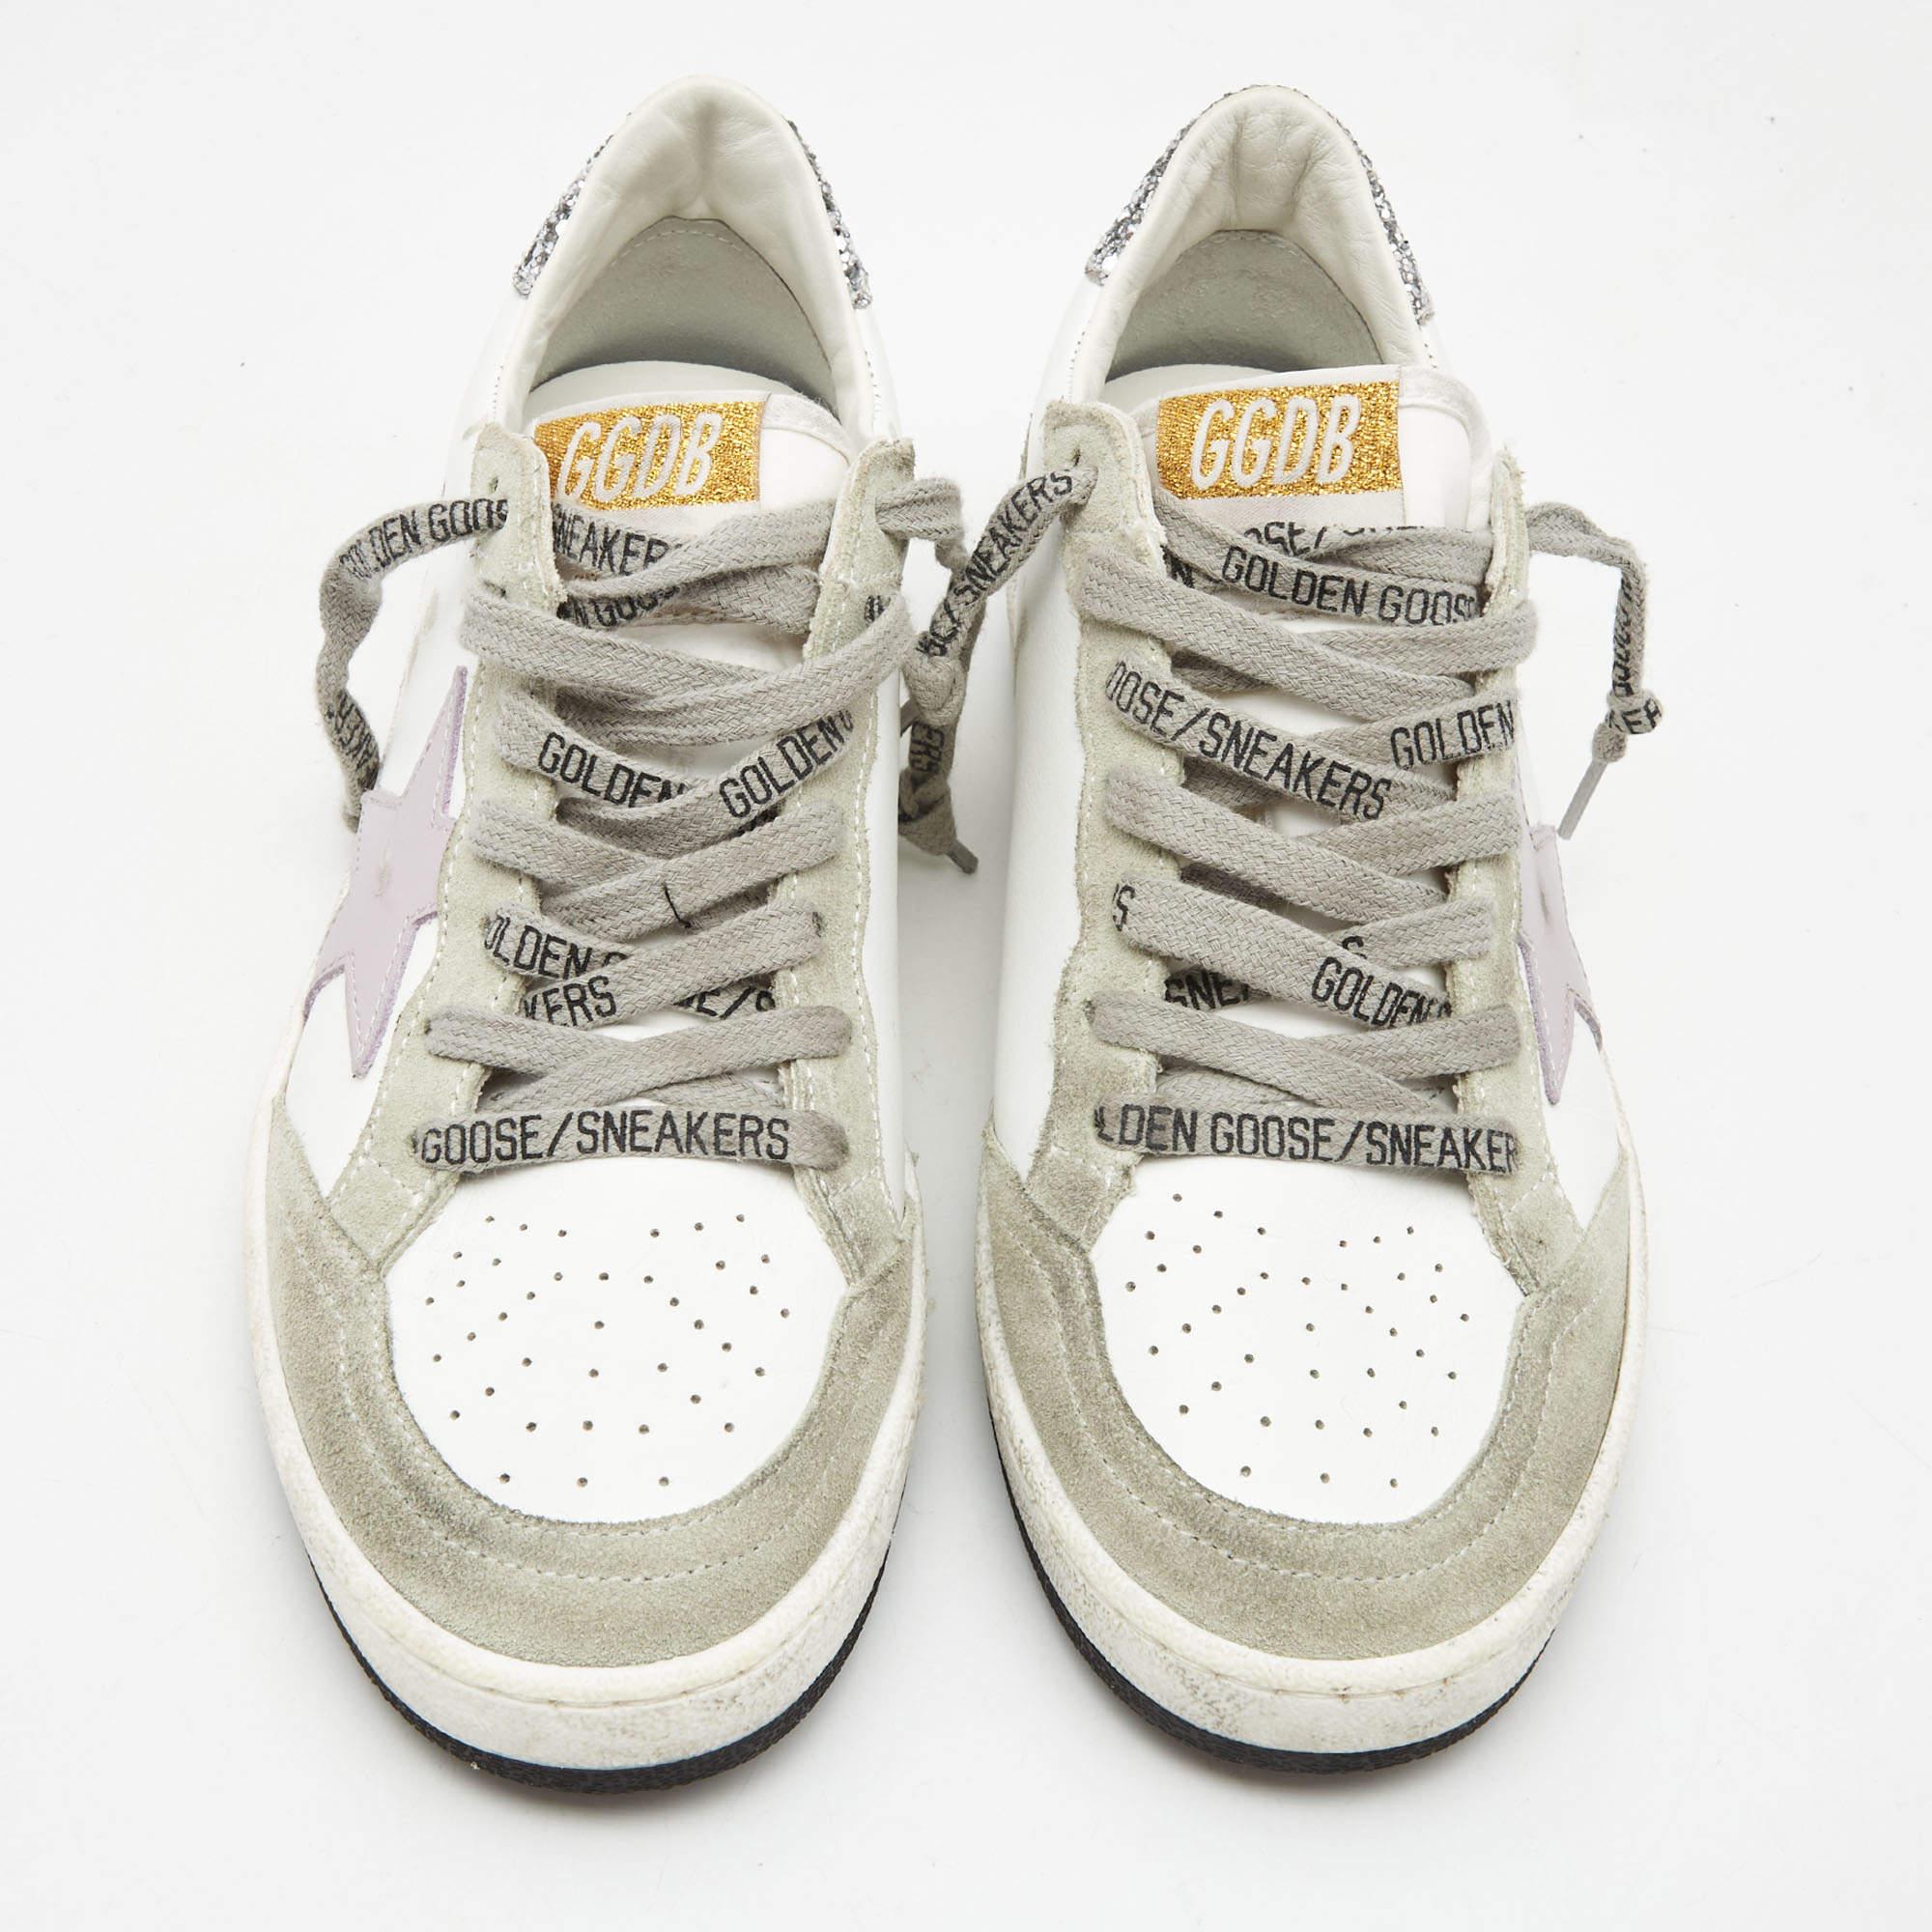 These sneakers from Golden Goose represent the idea of comfortable fashion. They are crafted from high-quality materials and designed with nothing but style. A perfect fit for all casual occasions, these sneakers will spruce up any look